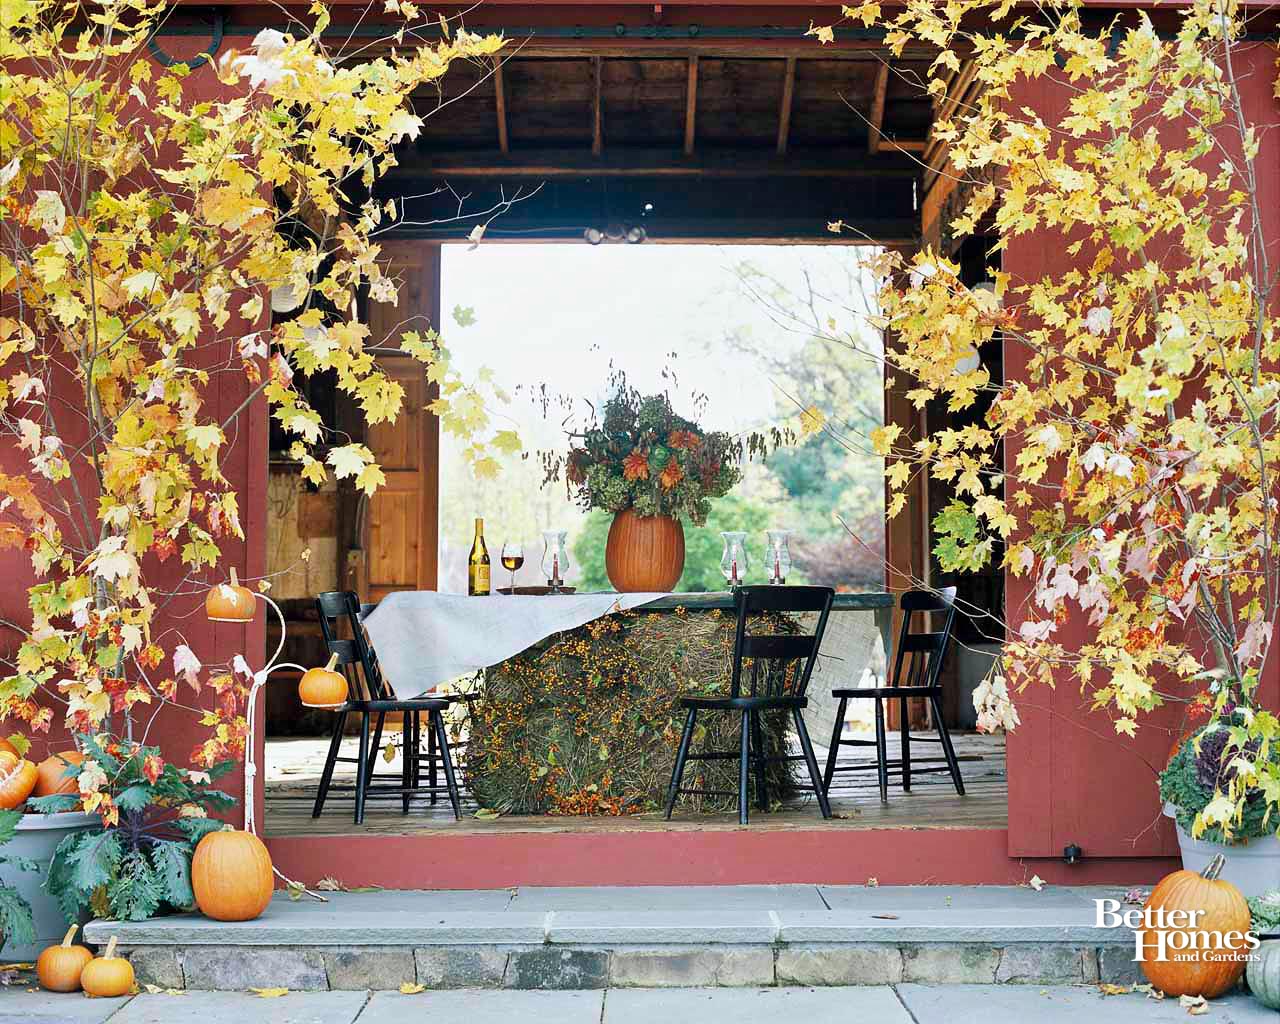 Outdoors Fall Screensavers The Best home